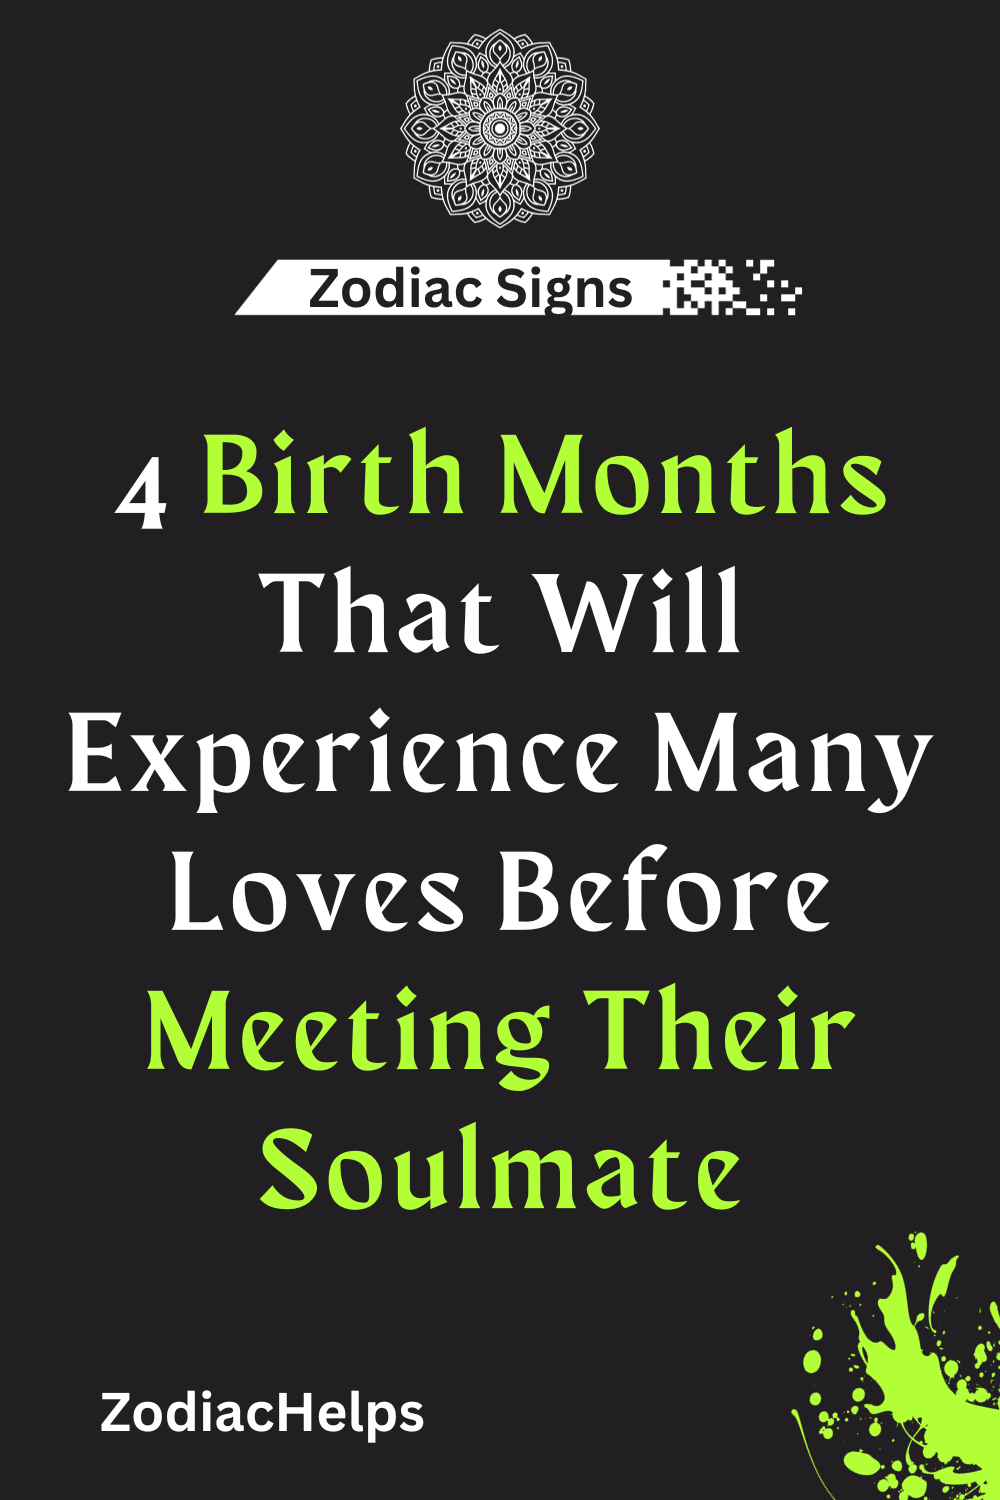 4 Birth Months That Will Experience Many Loves Before Meeting Their Soulmate